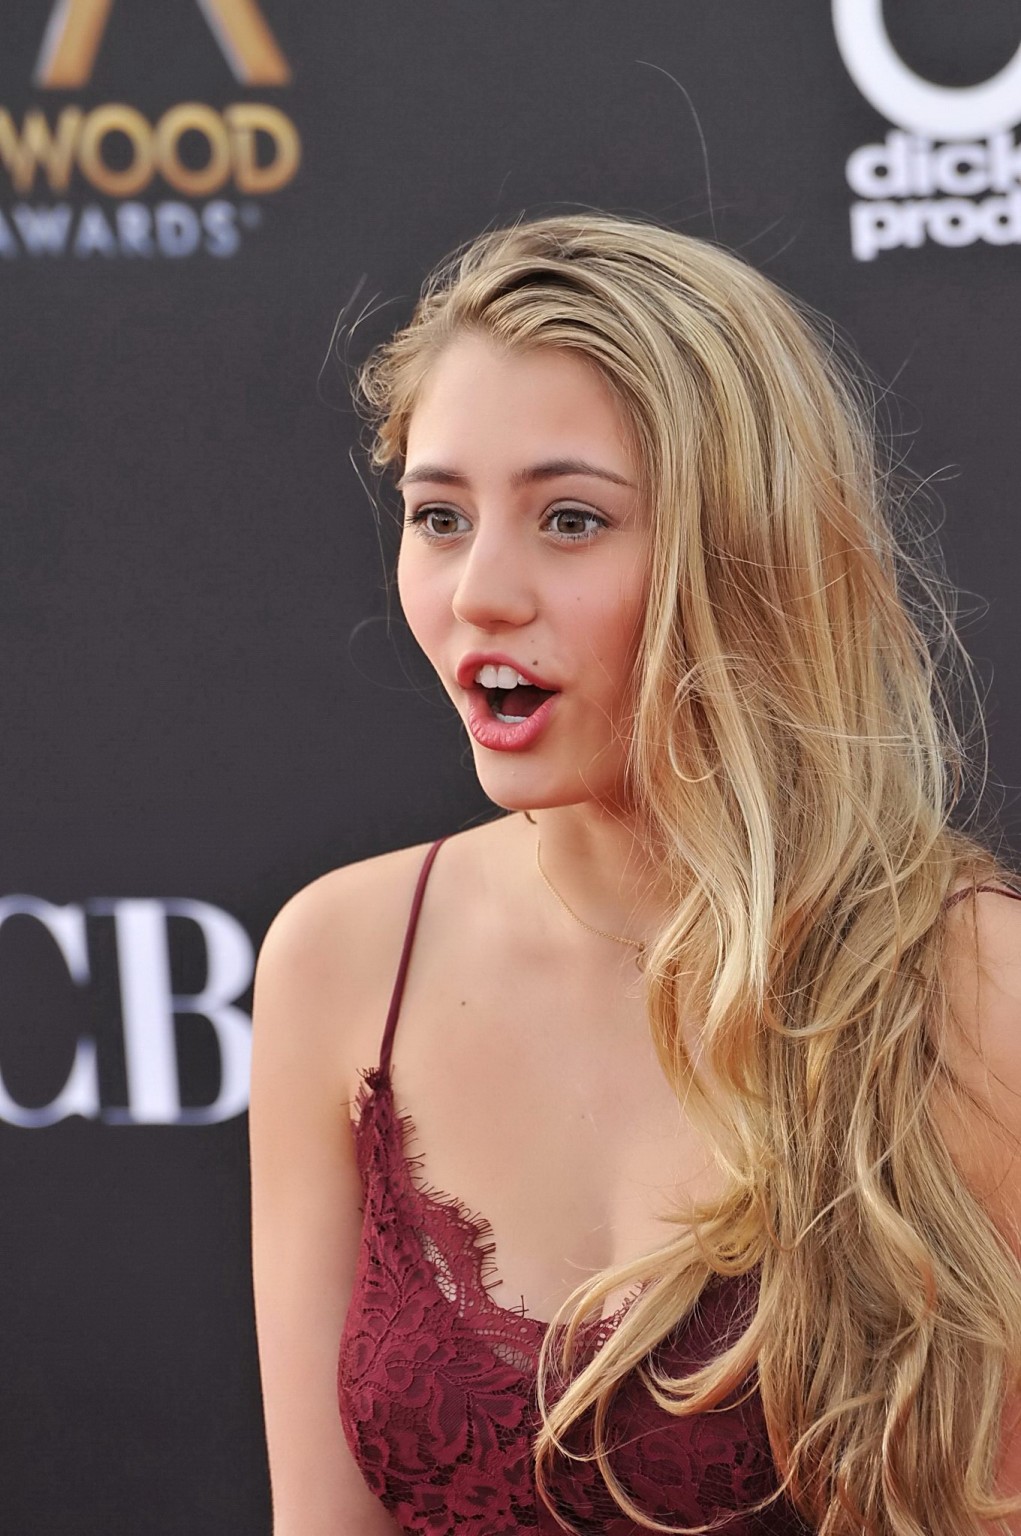 Lia Marie Johnson busty and leggy in a tiny lace crimson mini dress at 18th Annu #75180981